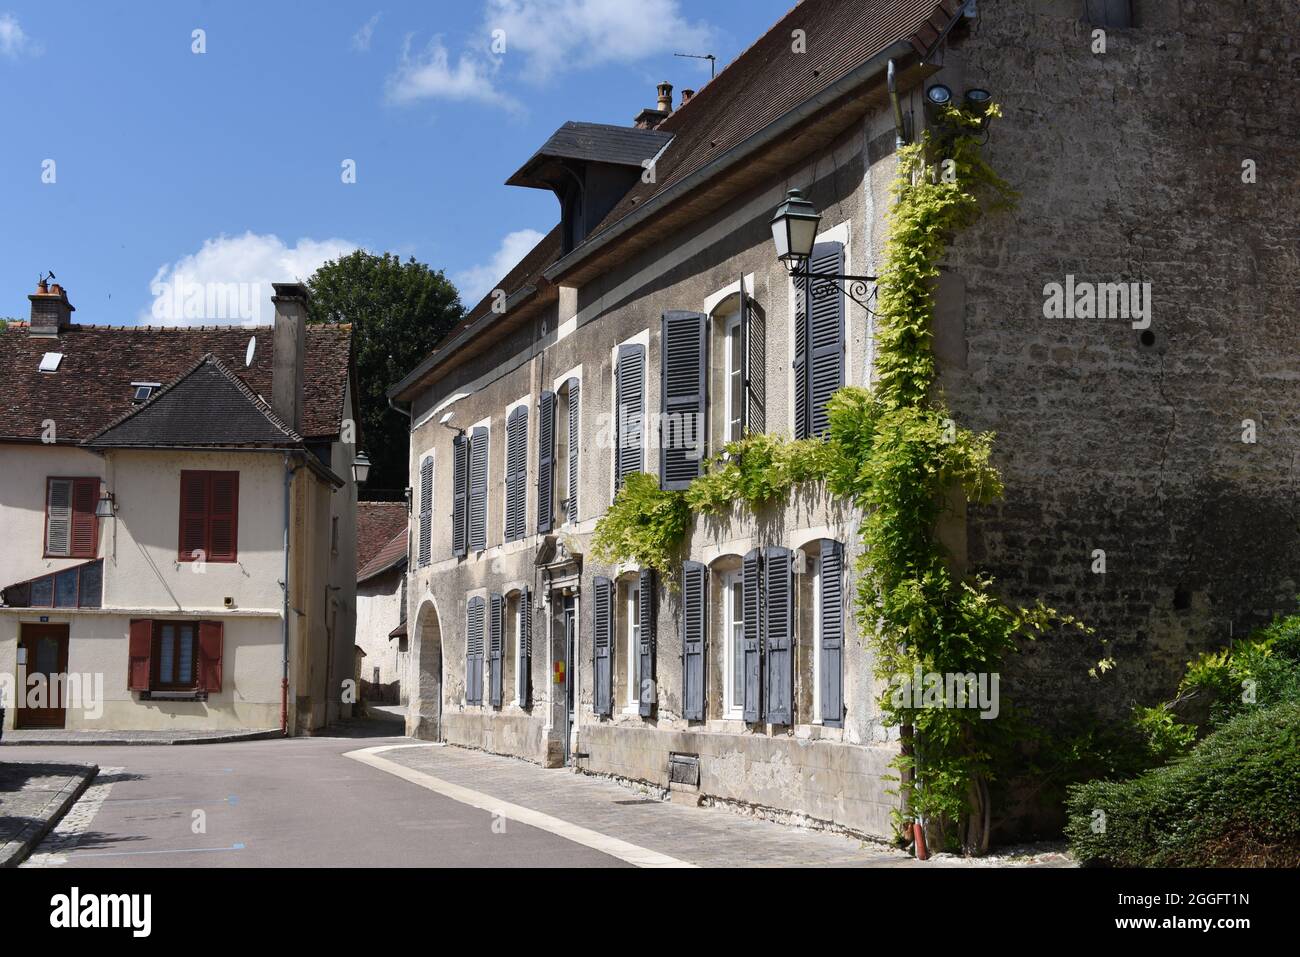 A beautiful old building in Bar-sur-Seine, France Stock Photo